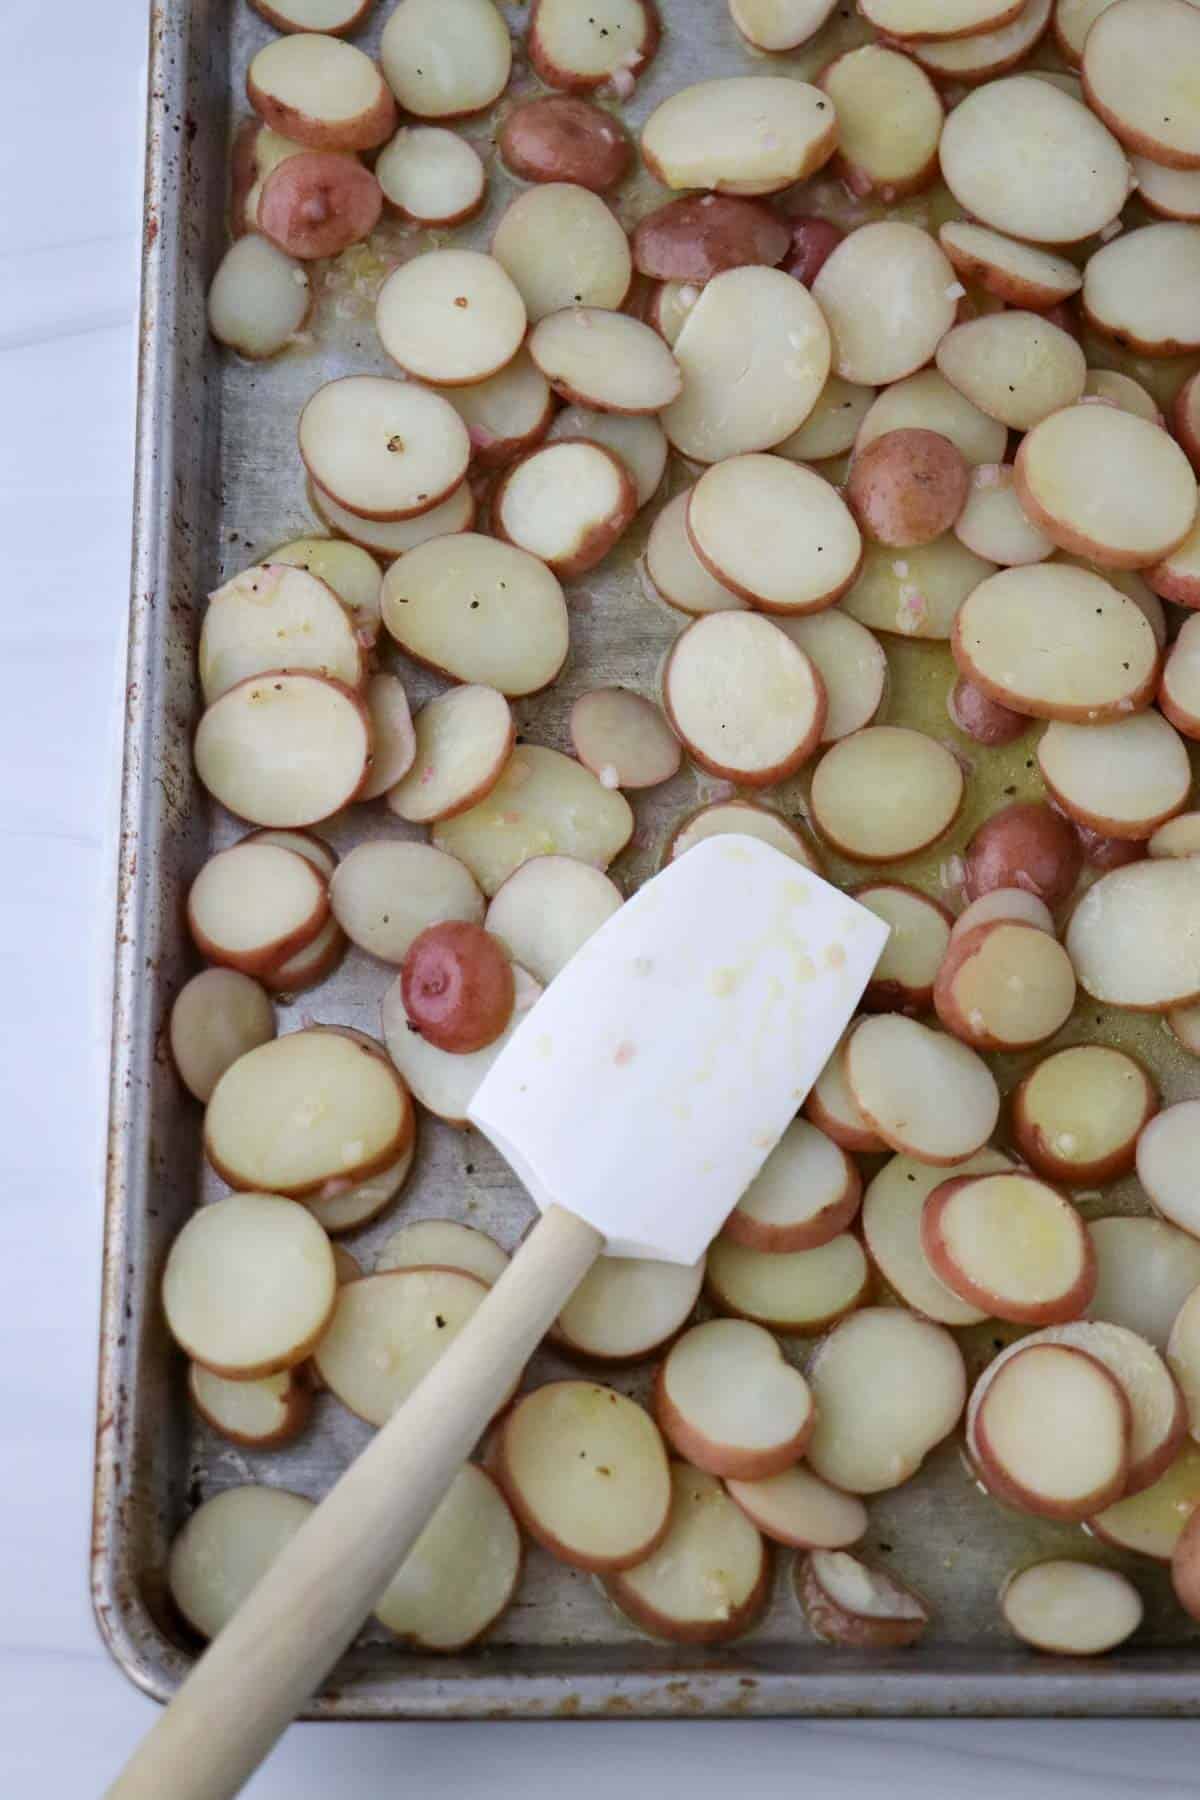 Sliced red potatoes on a baking sheet with a rubber spatula.